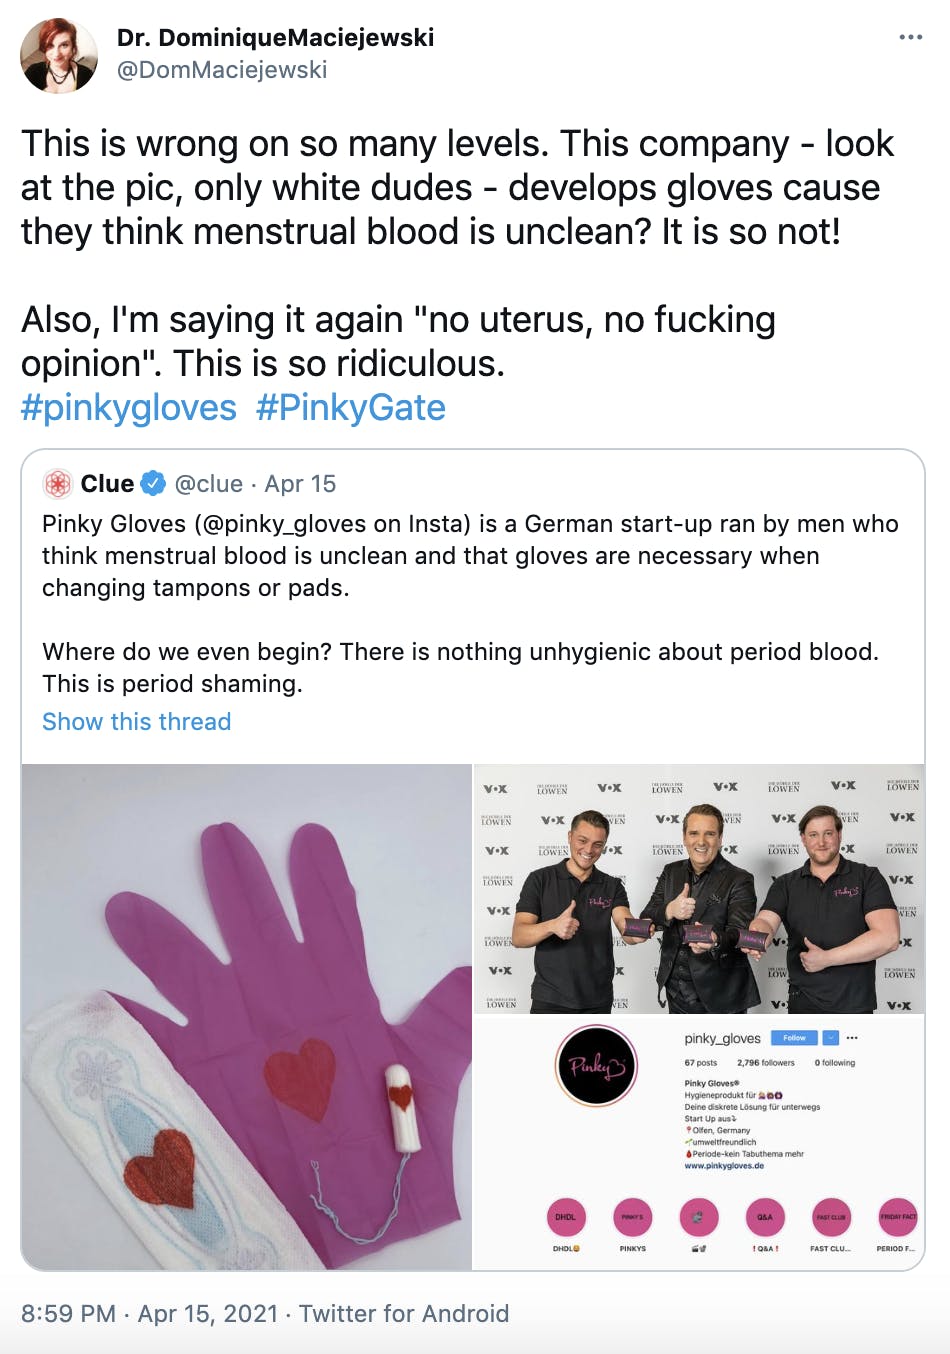 'This is wrong on so many levels. This company - look at the pic, only white dudes - develops gloves cause they think menstrual blood is unclean? It is so not! Also, I'm saying it again 'no uterus, no fucking opinion'. This is so ridiculous. #pinkygloves #PinkyGate Quote Tweet' Embedded: the earlier tweet from Clue